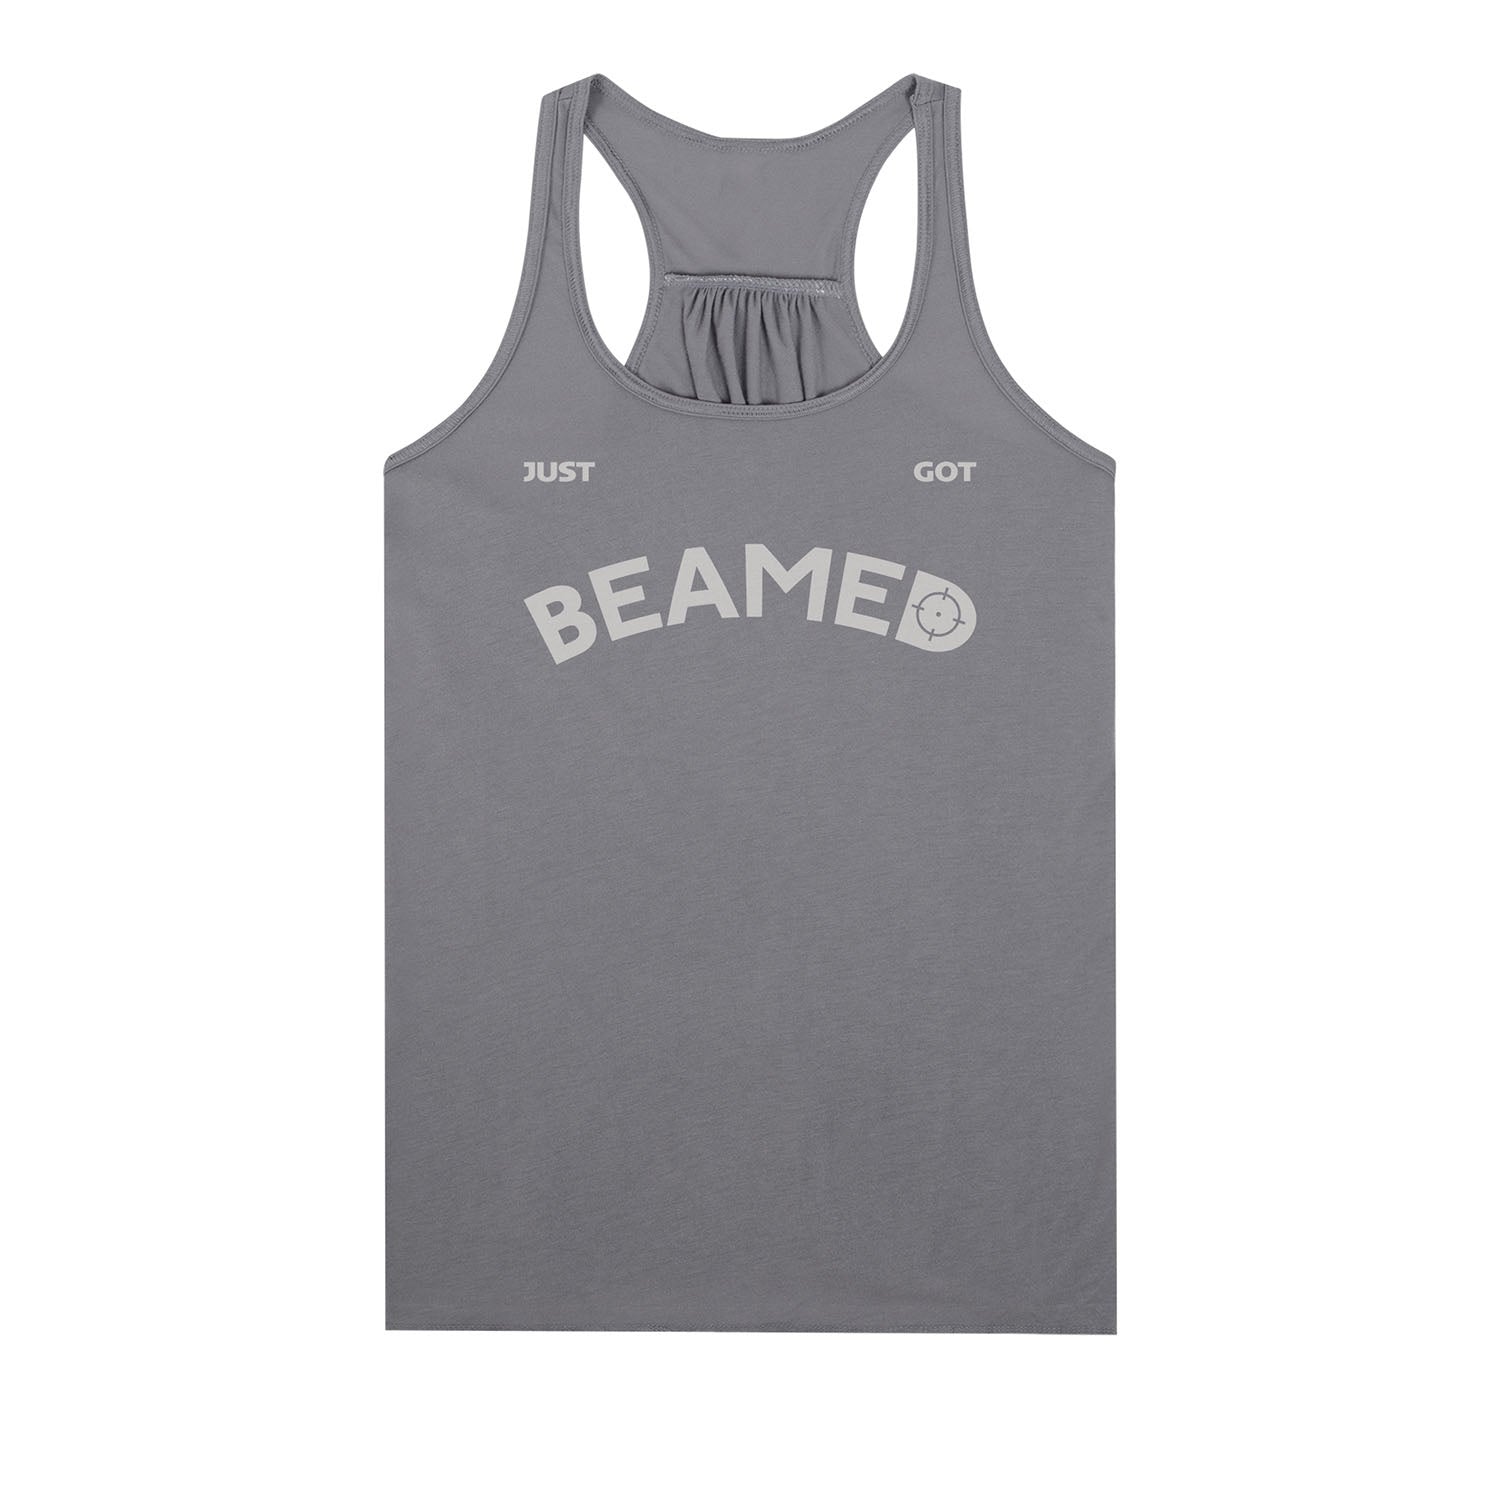 Call of Duty Grey Beamed Women's Tank - Front View